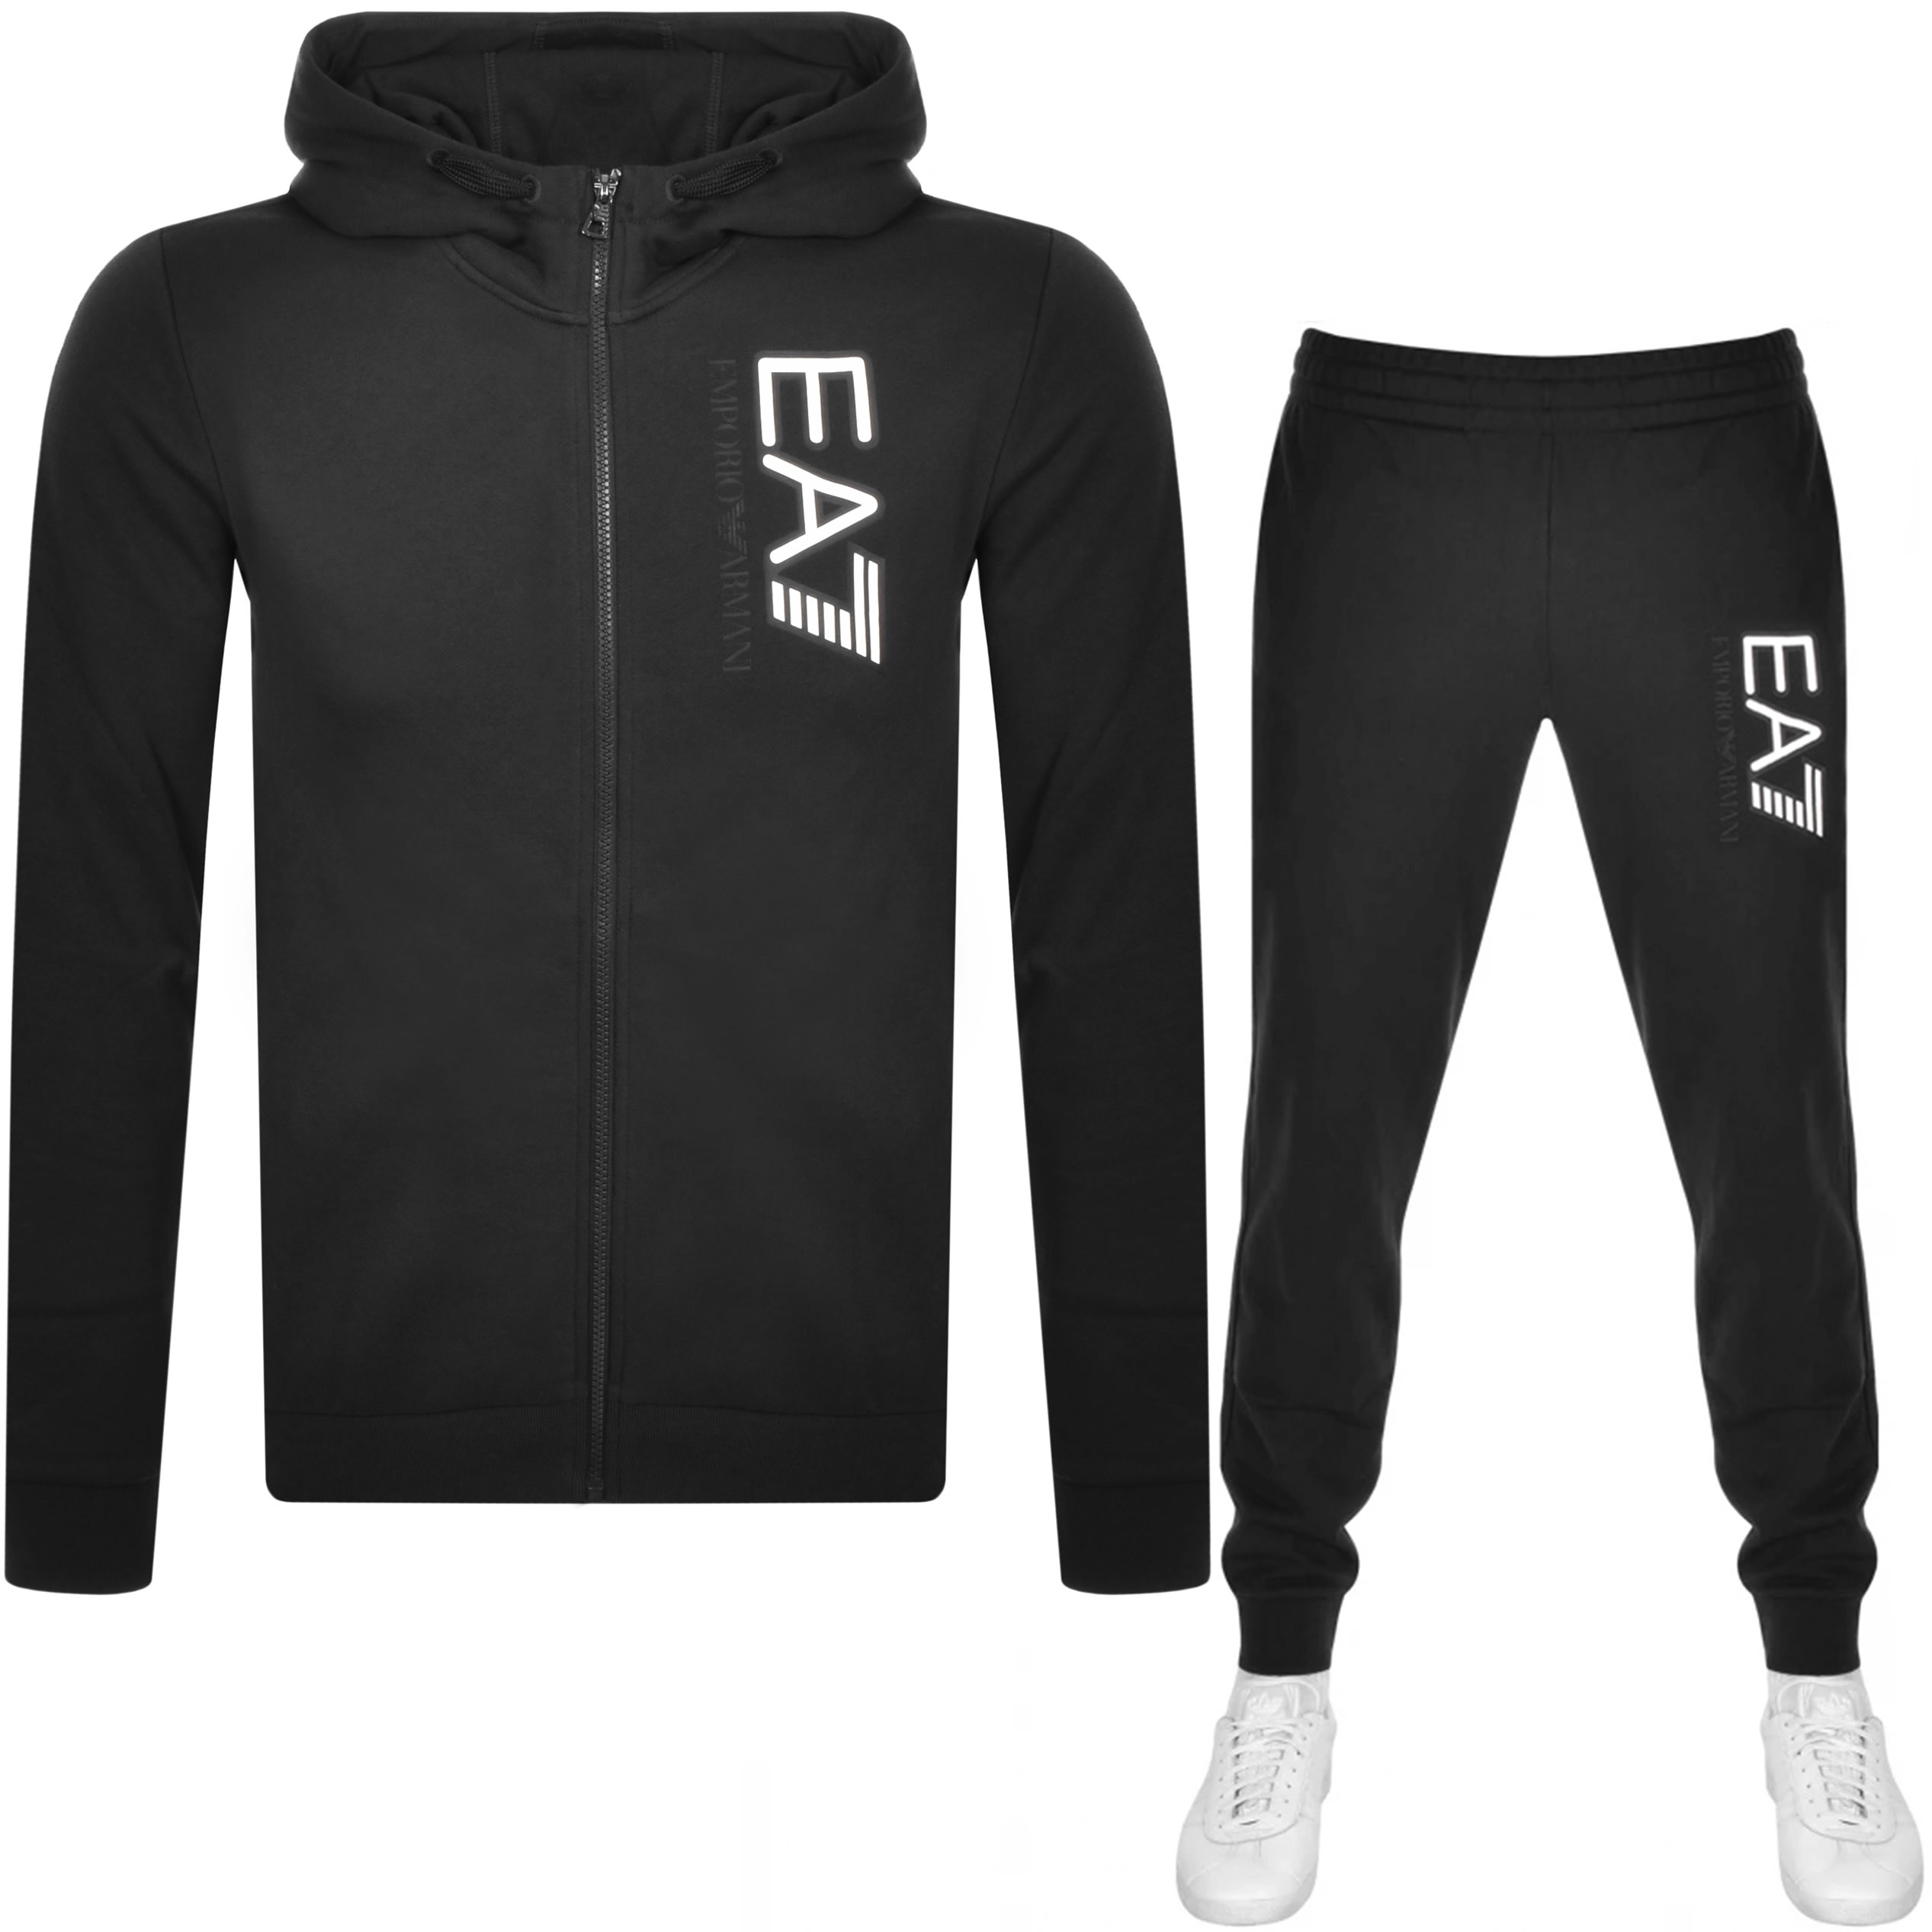 tracksuits for ladies at mr priceUltimate Special Offers – 2021 New ...